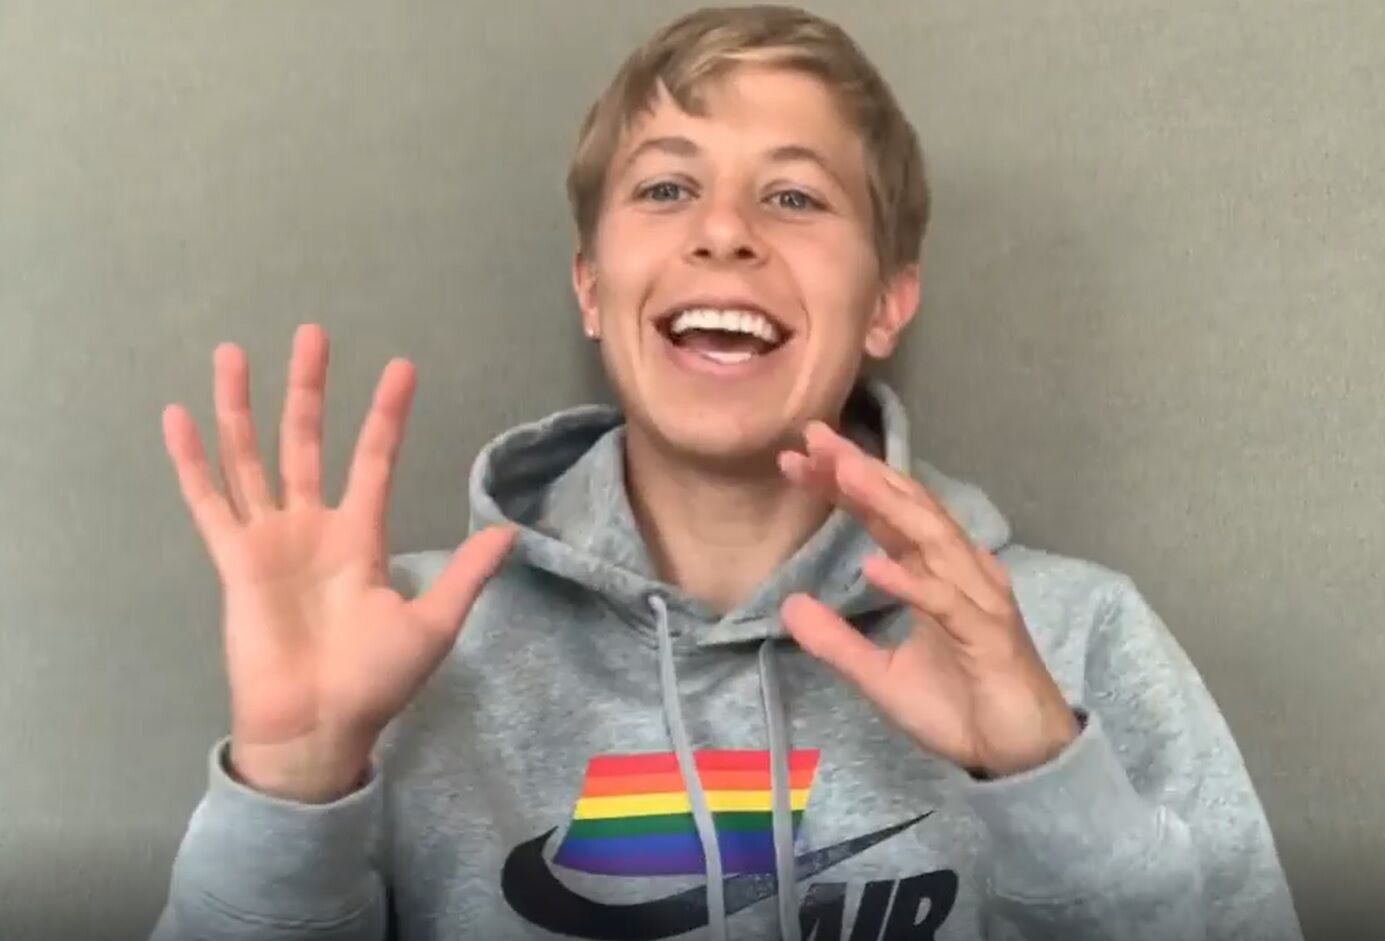 Soccer player Quinn is the first out trans athlete to win an Olympics medal